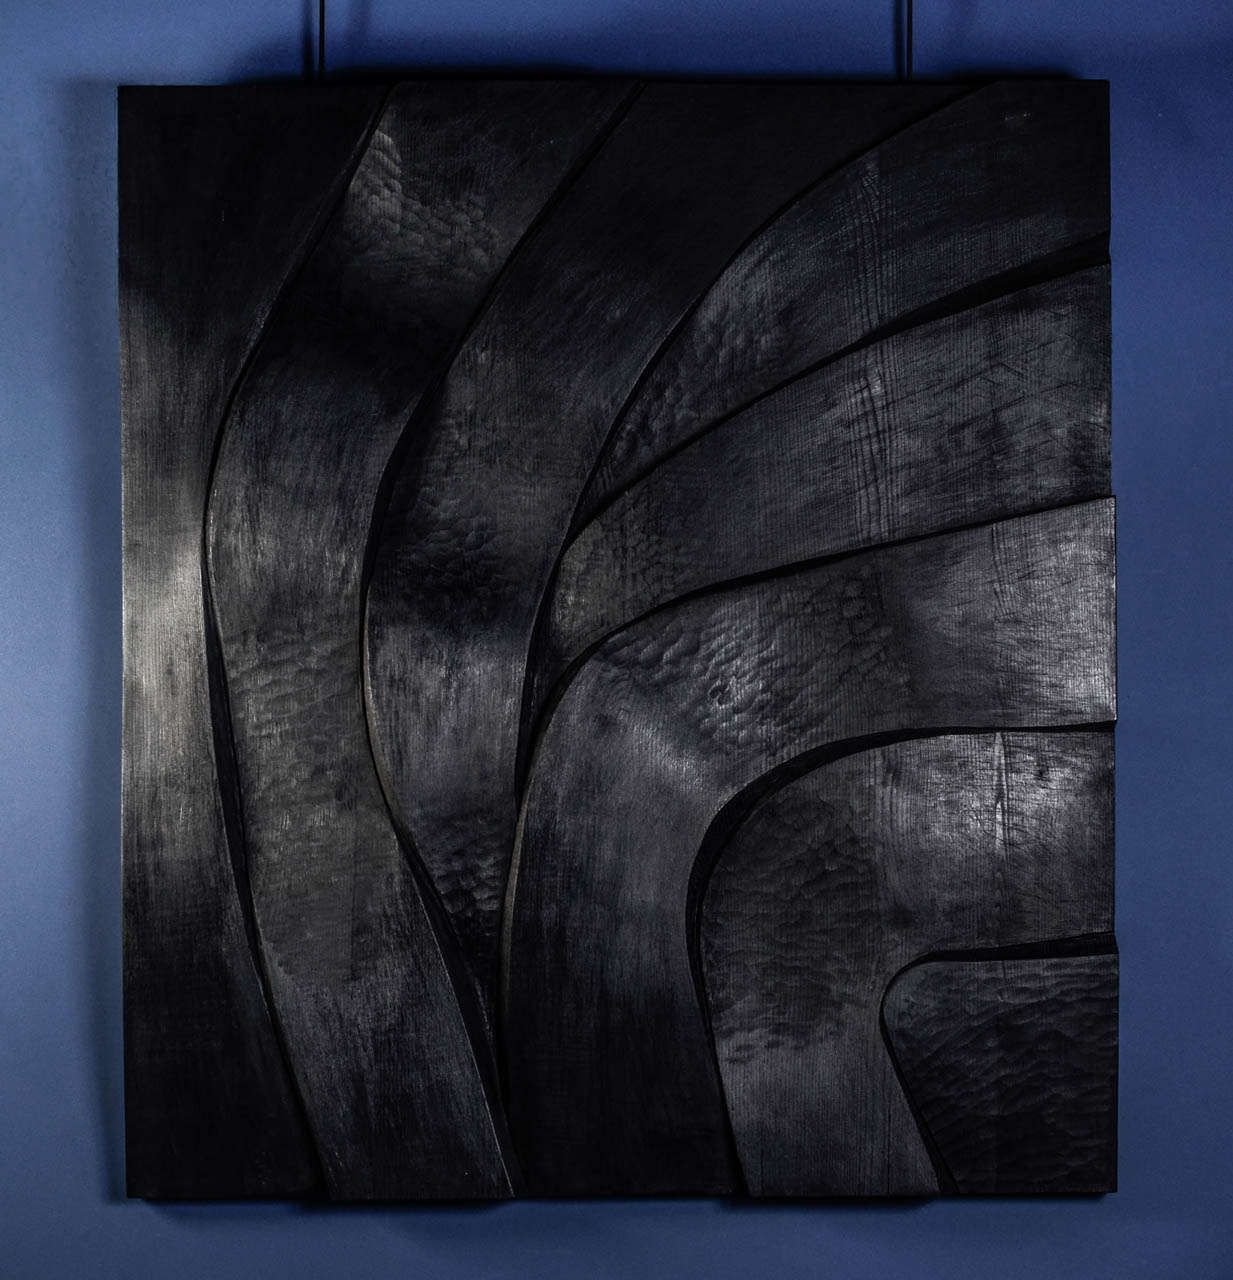 Bas-relief wall sculpture in black wood by Bertrand Créac'h - Contemporary work